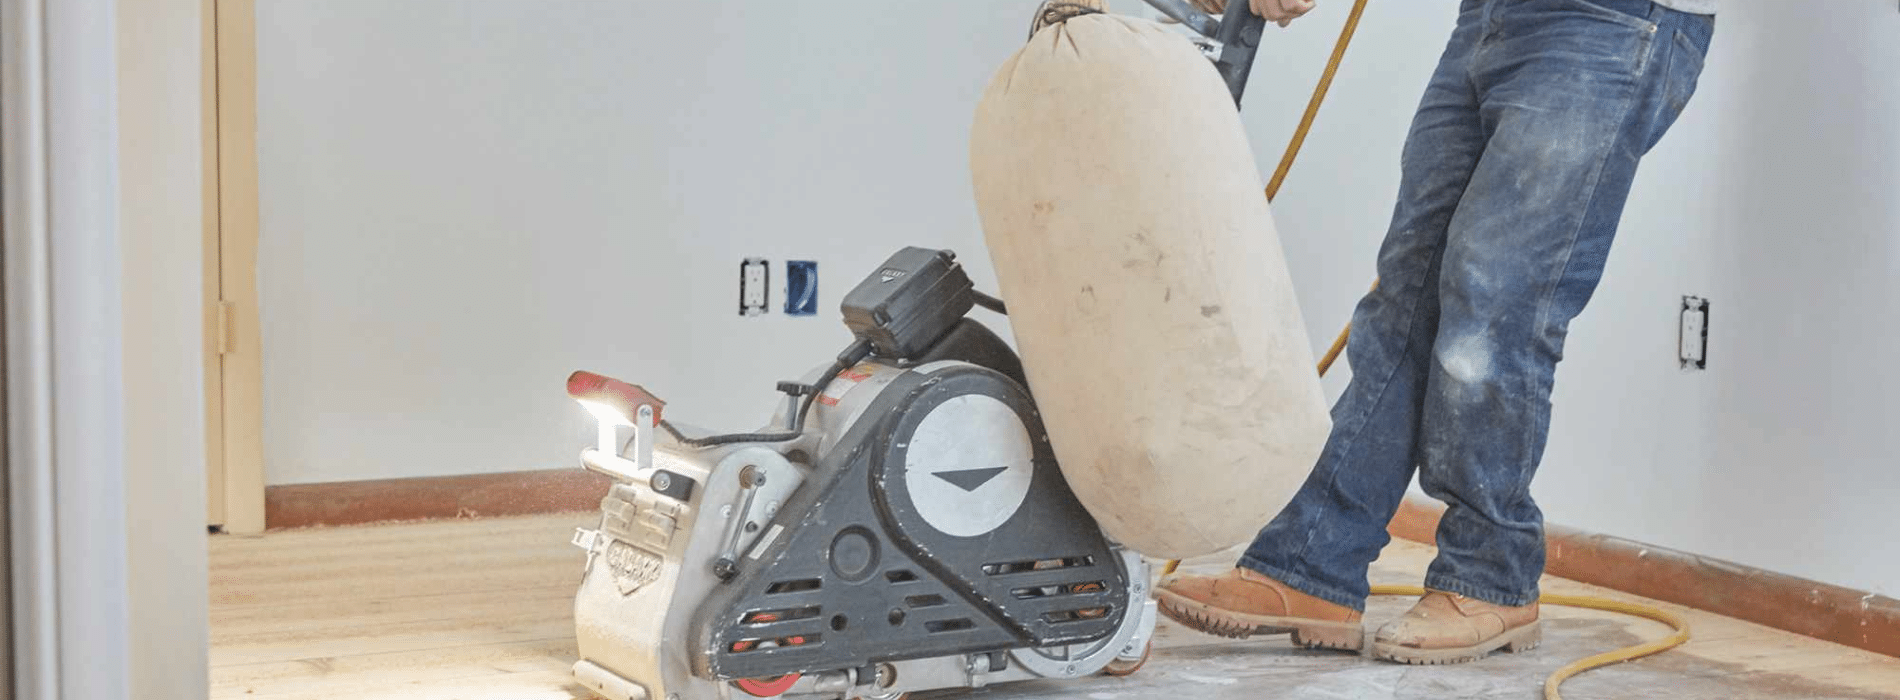 In City of London, EC1, Mr Sander® are sanding a parquet floor using a Bona Scorpion drum sander. The sander has a dimension of 200 mm, operates at 1.5 kW power, and runs on a voltage of 240 V at a frequency of 50 Hz.